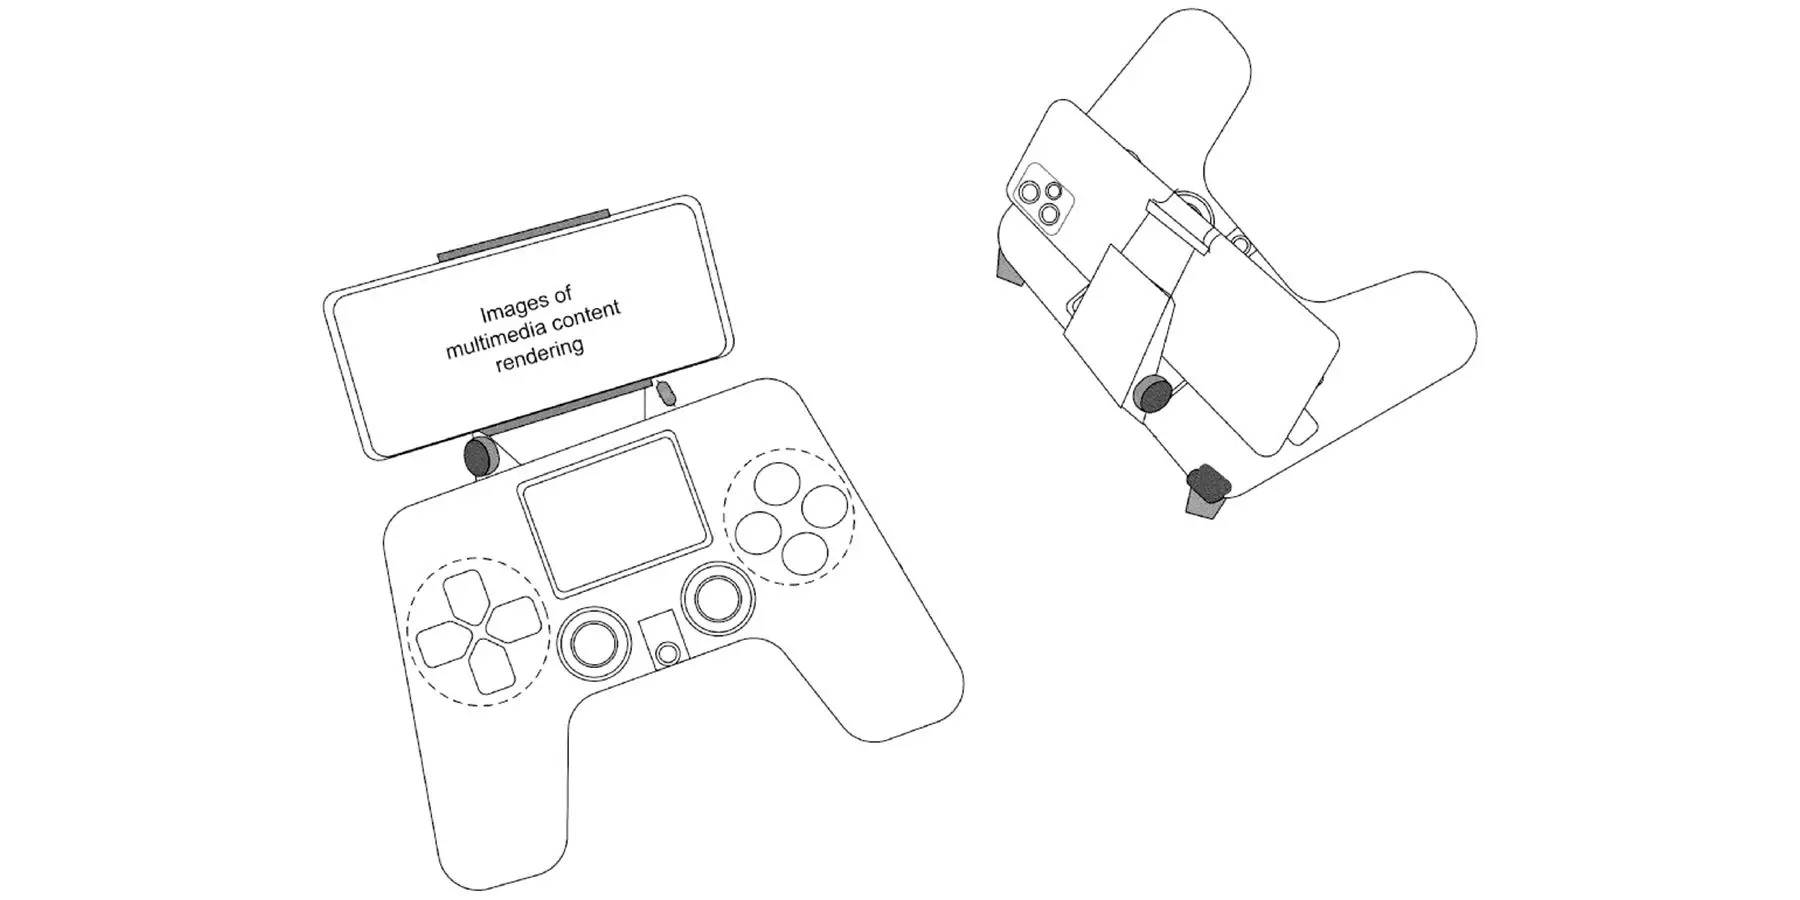 sony virtual controller buttons patent smartphone mounted on gamepad